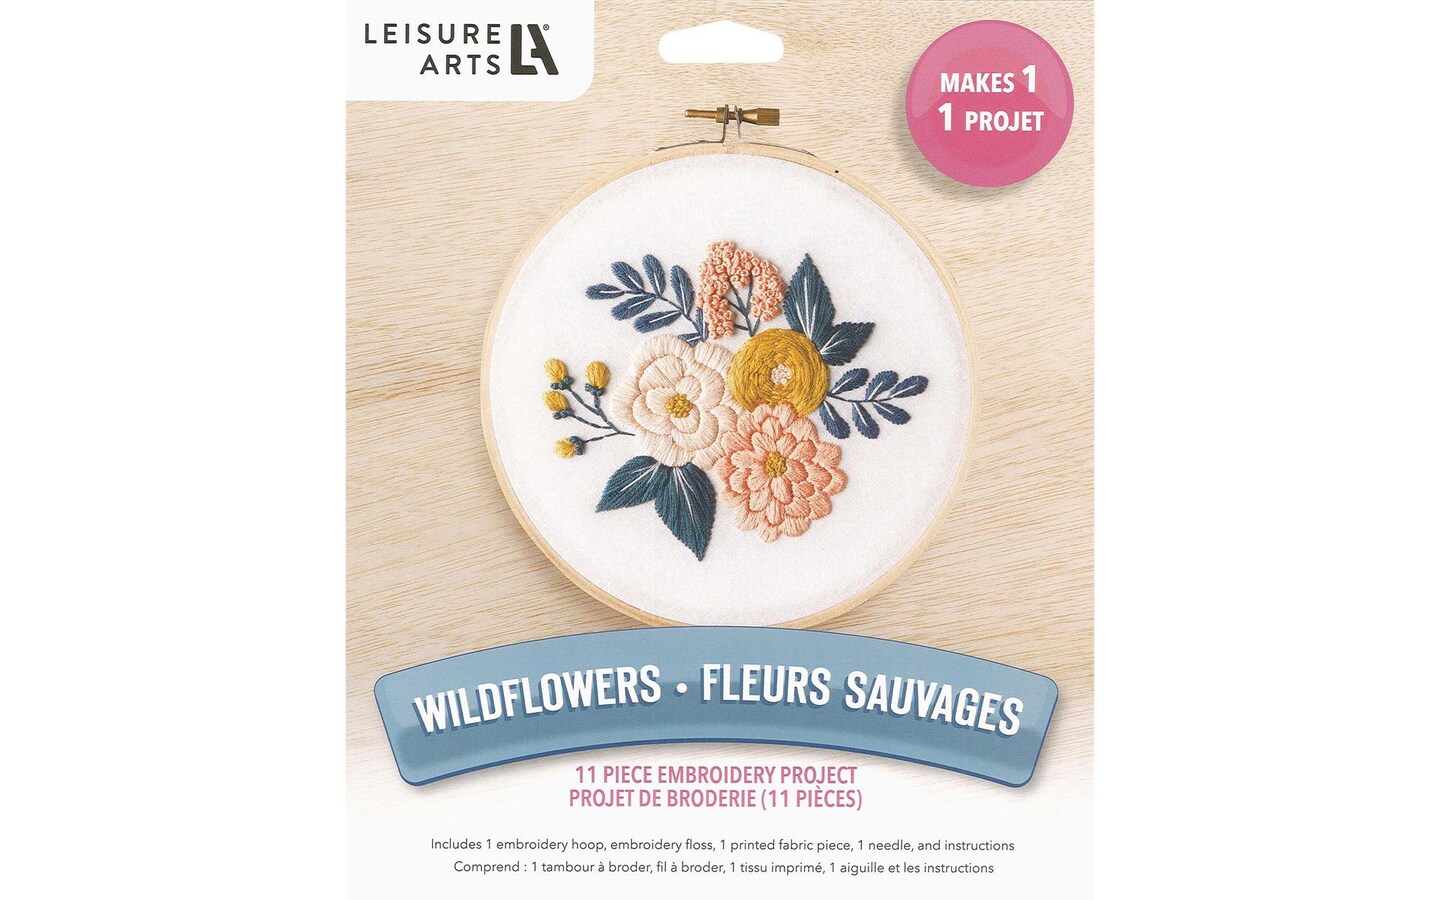 Leisure Arts Embroidery Kit 6 Wildflowers - embroidery kit for